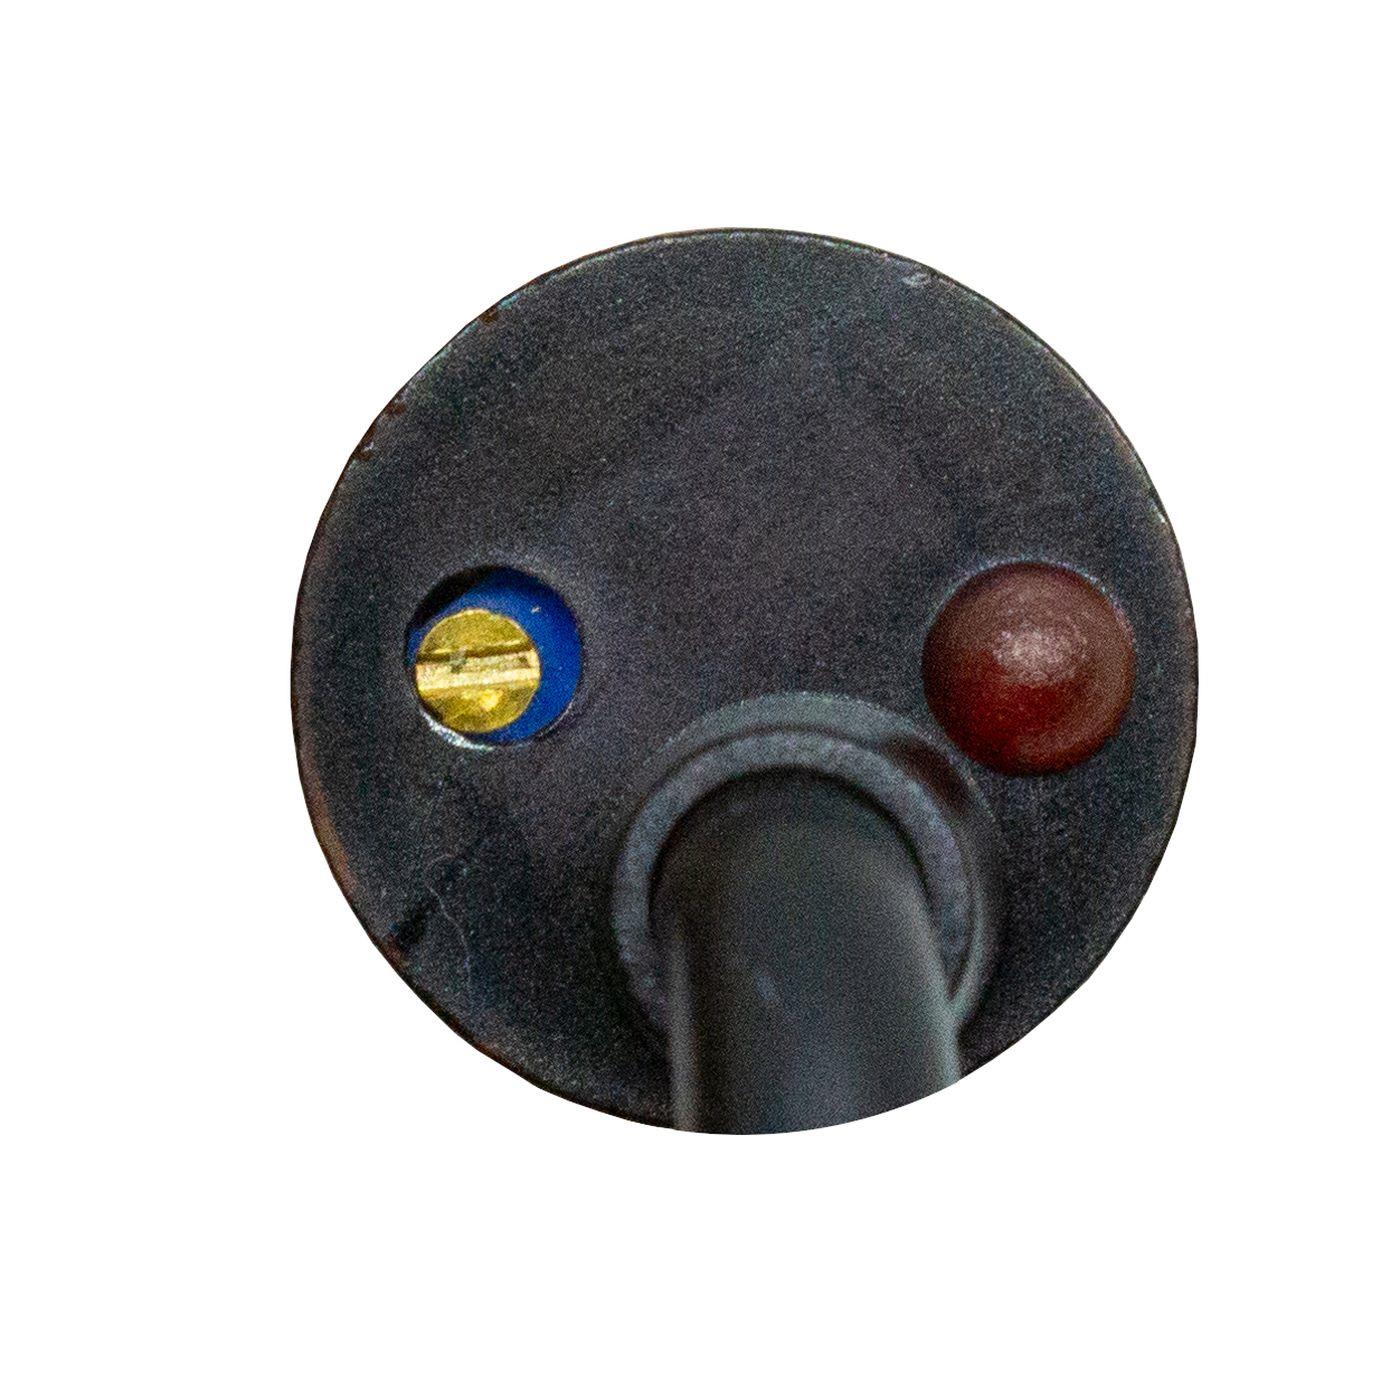 Proximity switch Capacitive 18mm M18 NPN NC contact 6...36V DC IP67 Sensor Brass nickel-plated -30...+65°C